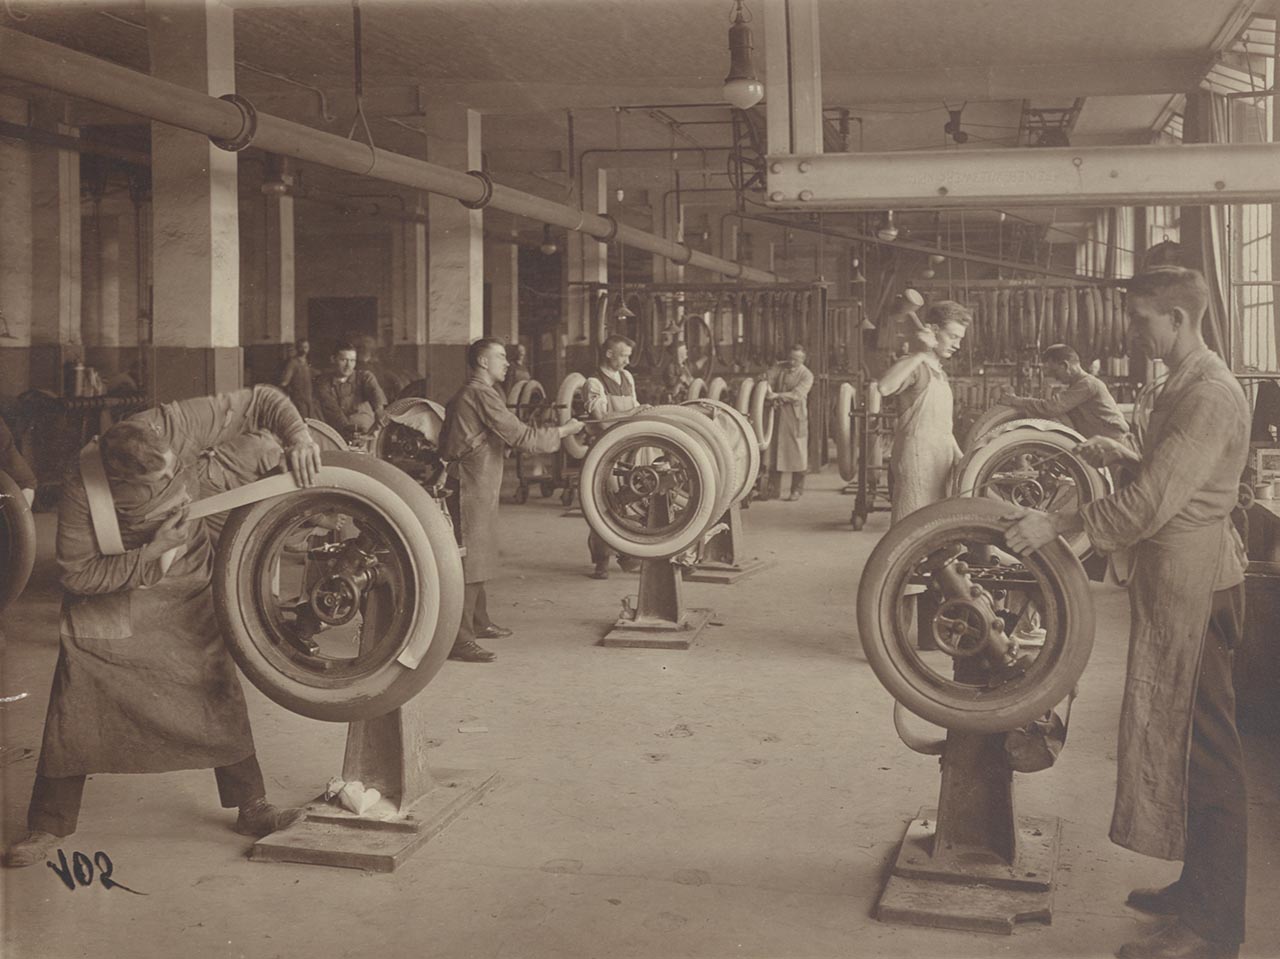 Scene from a historic tire production plant.